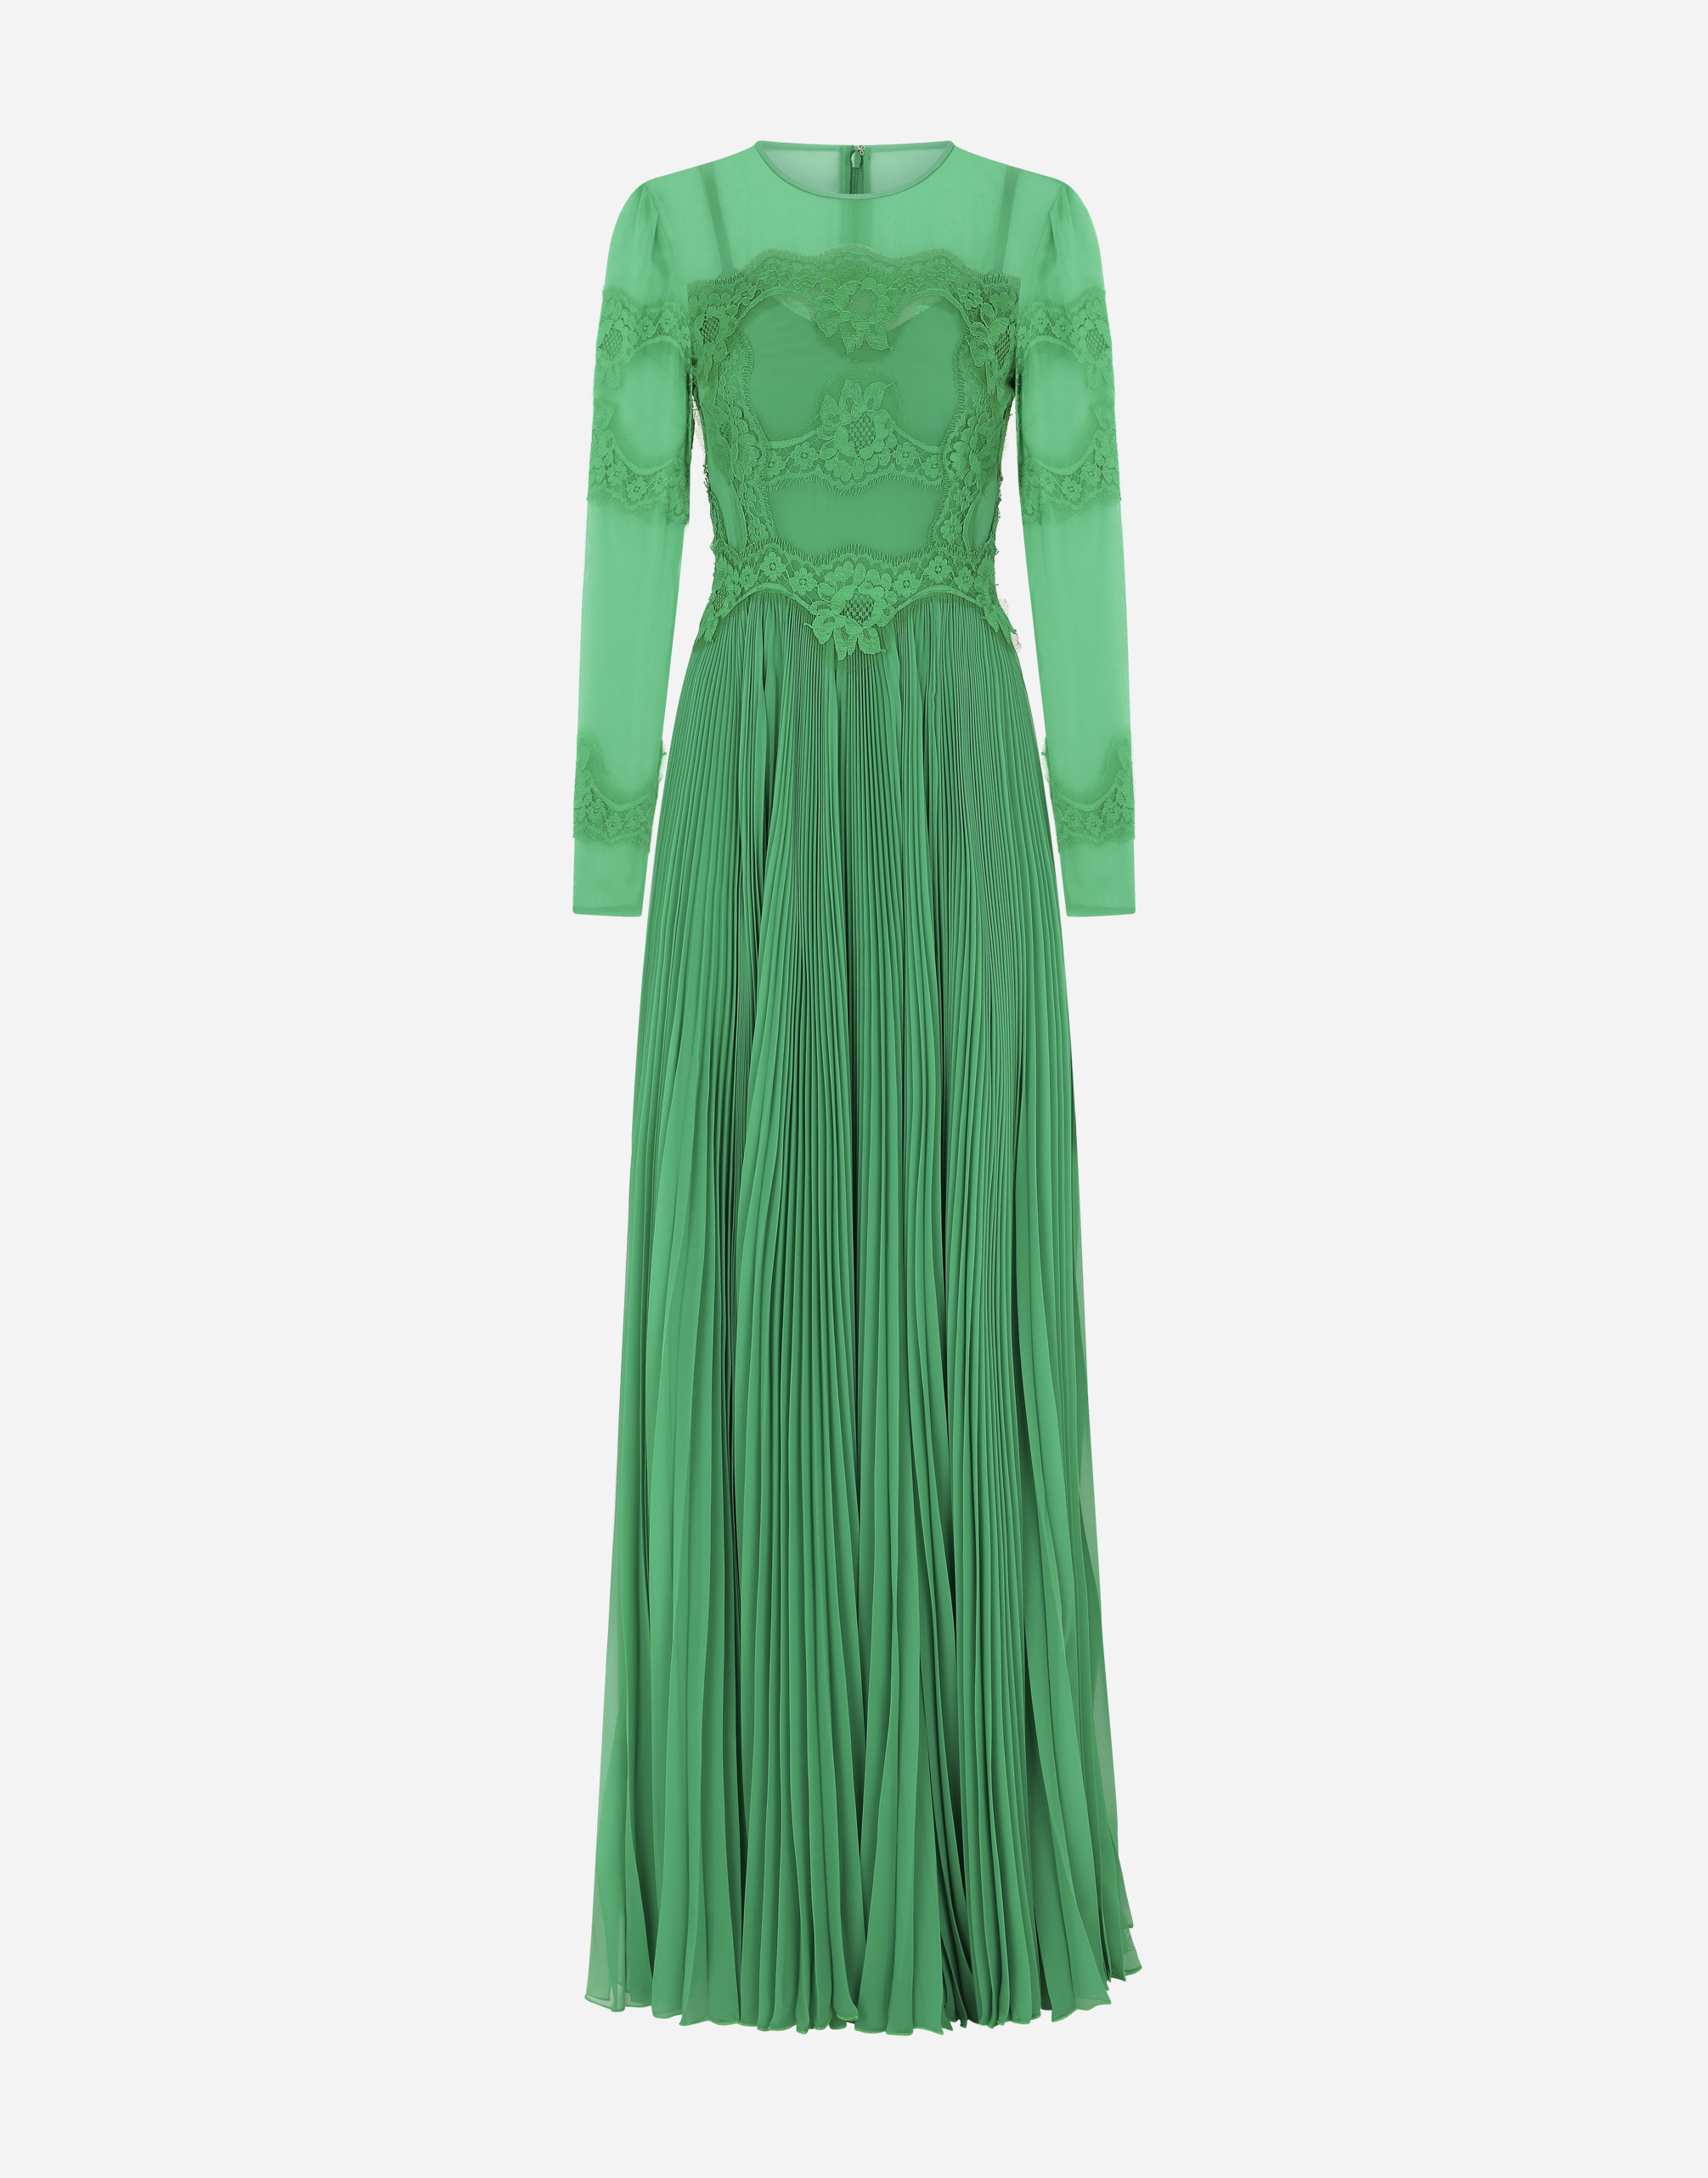 Dolce & Gabbana Long Dress With Lace Details In Green